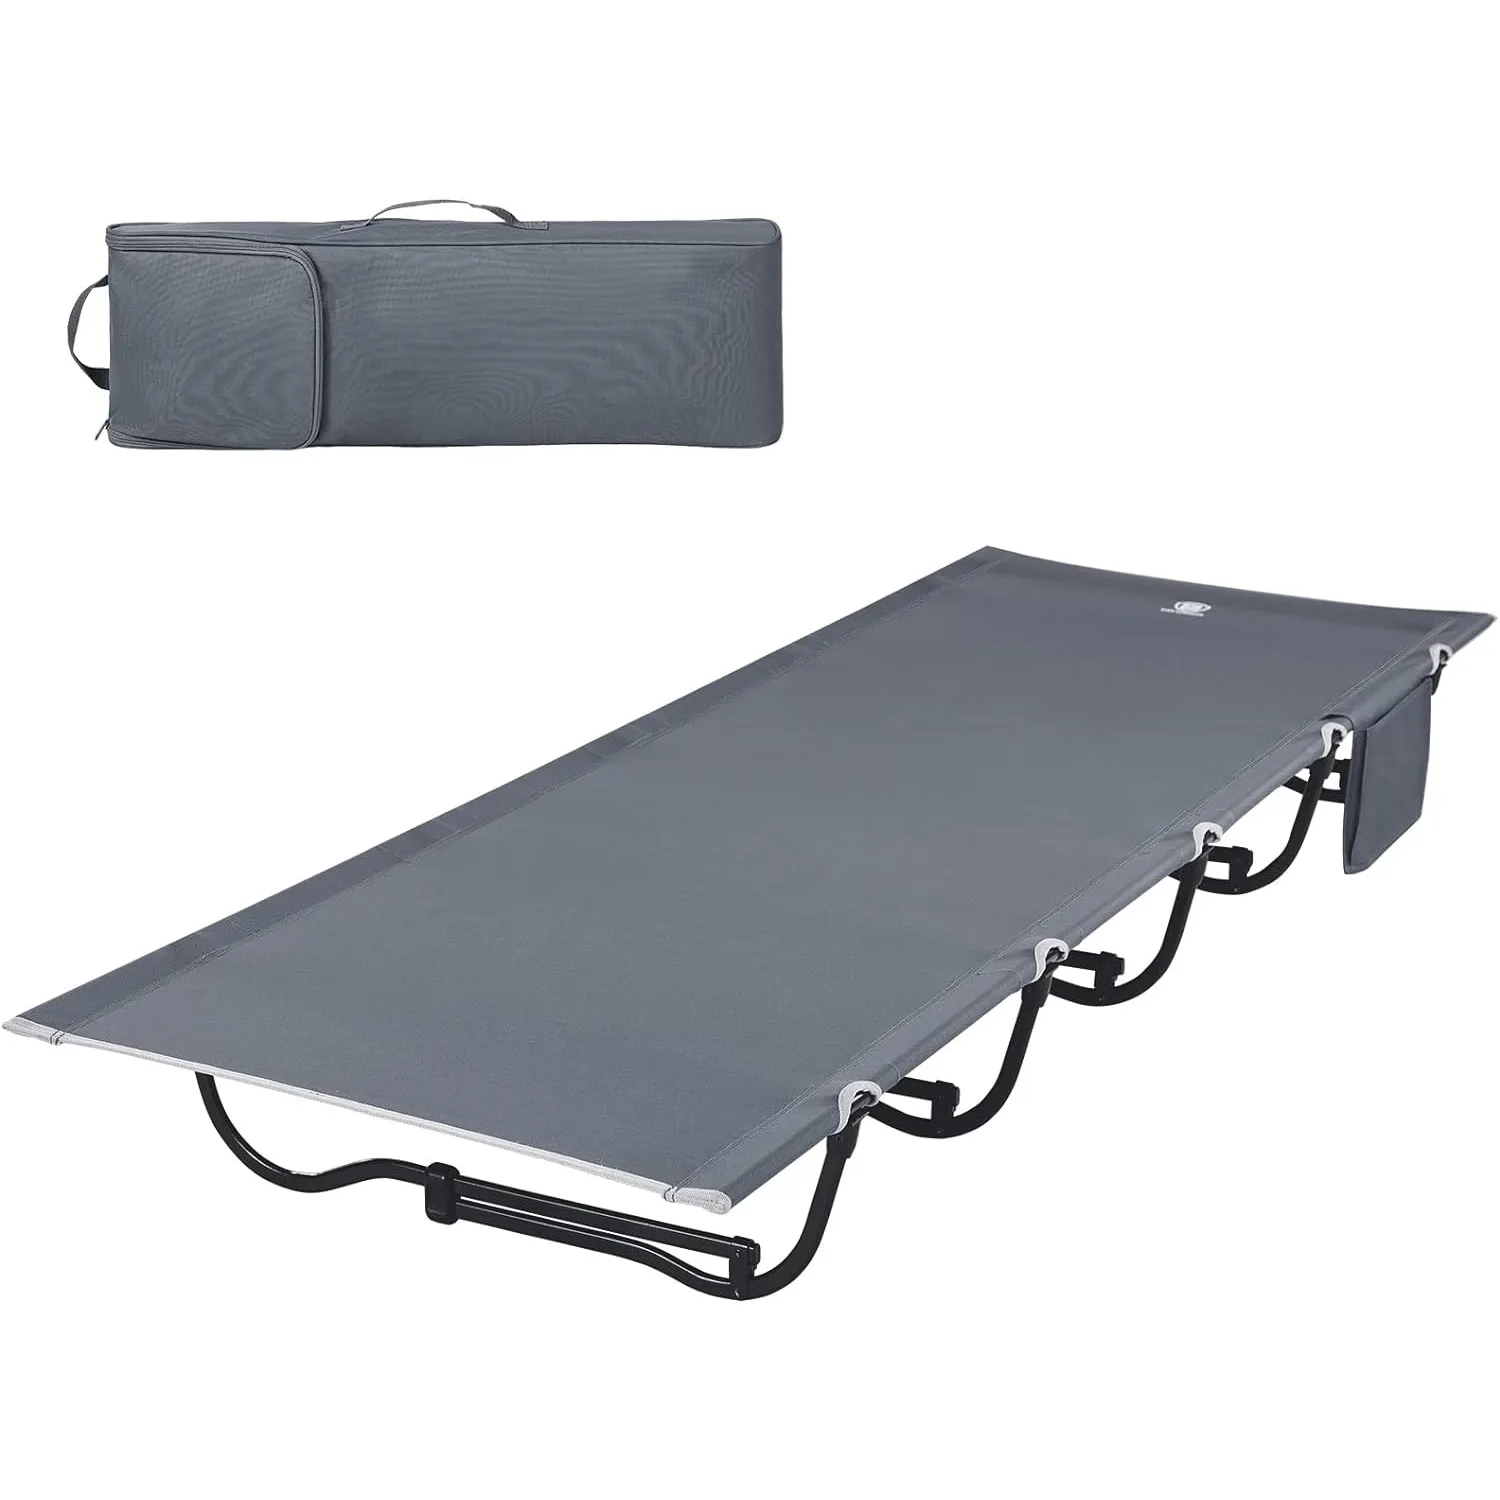 

EVER ADVANCED Folding Camping Cot for Adults, Compact Sleeping Cots with Side Pocket, Portable Heavy Duty Foldable Camp Bed